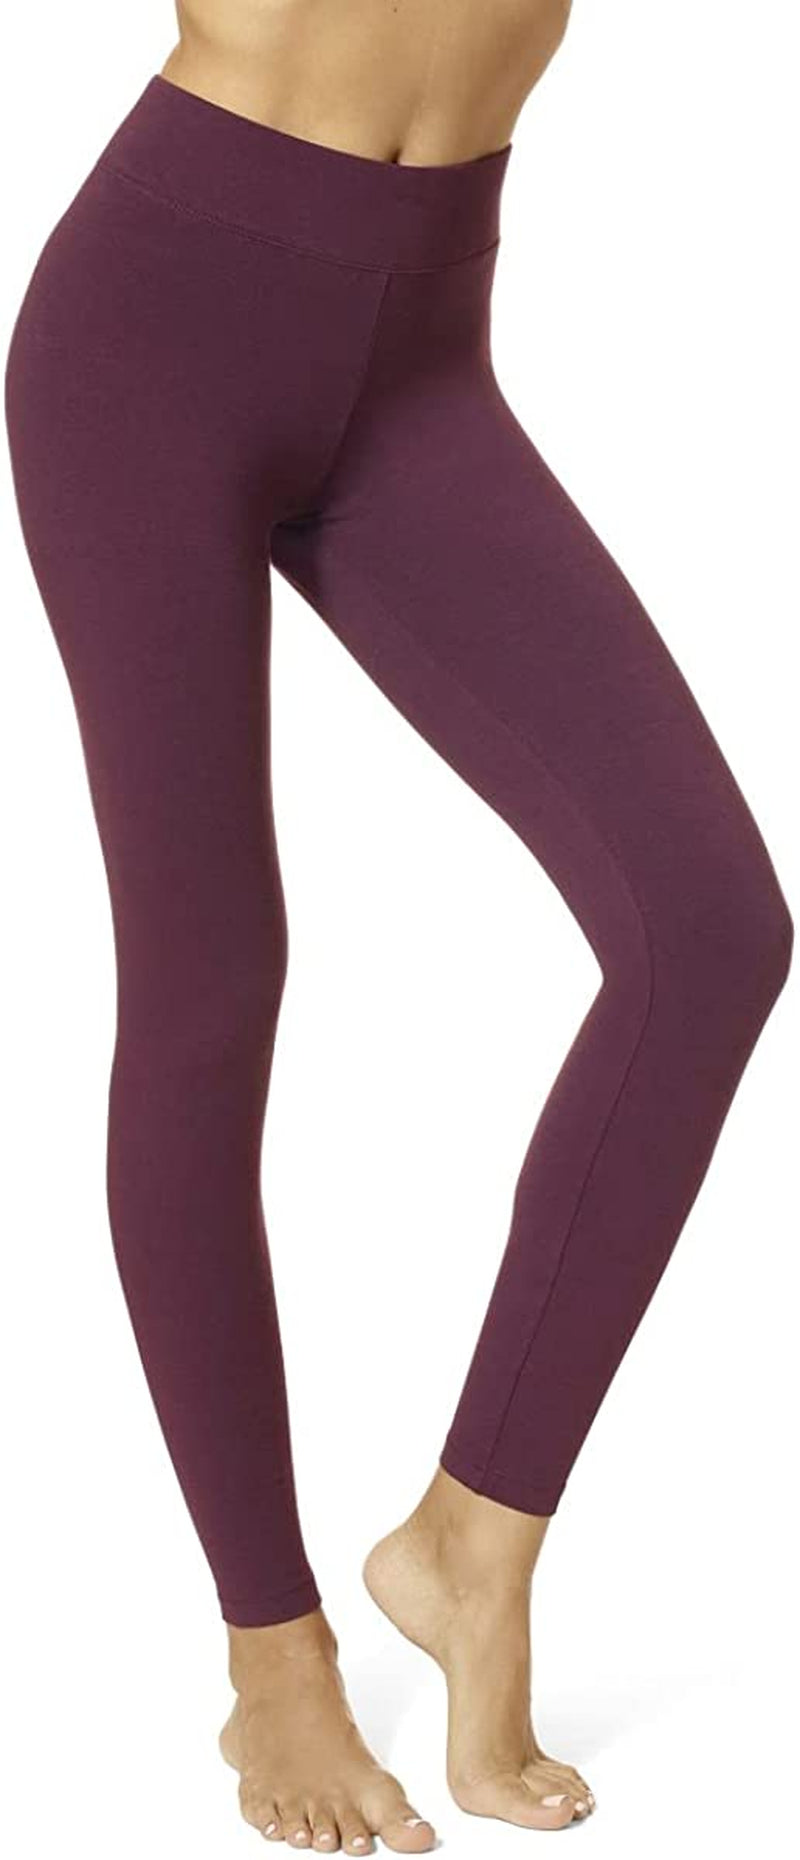 HUE Women'S Cotton Ultra Legging with Wide Waistband, Assorted